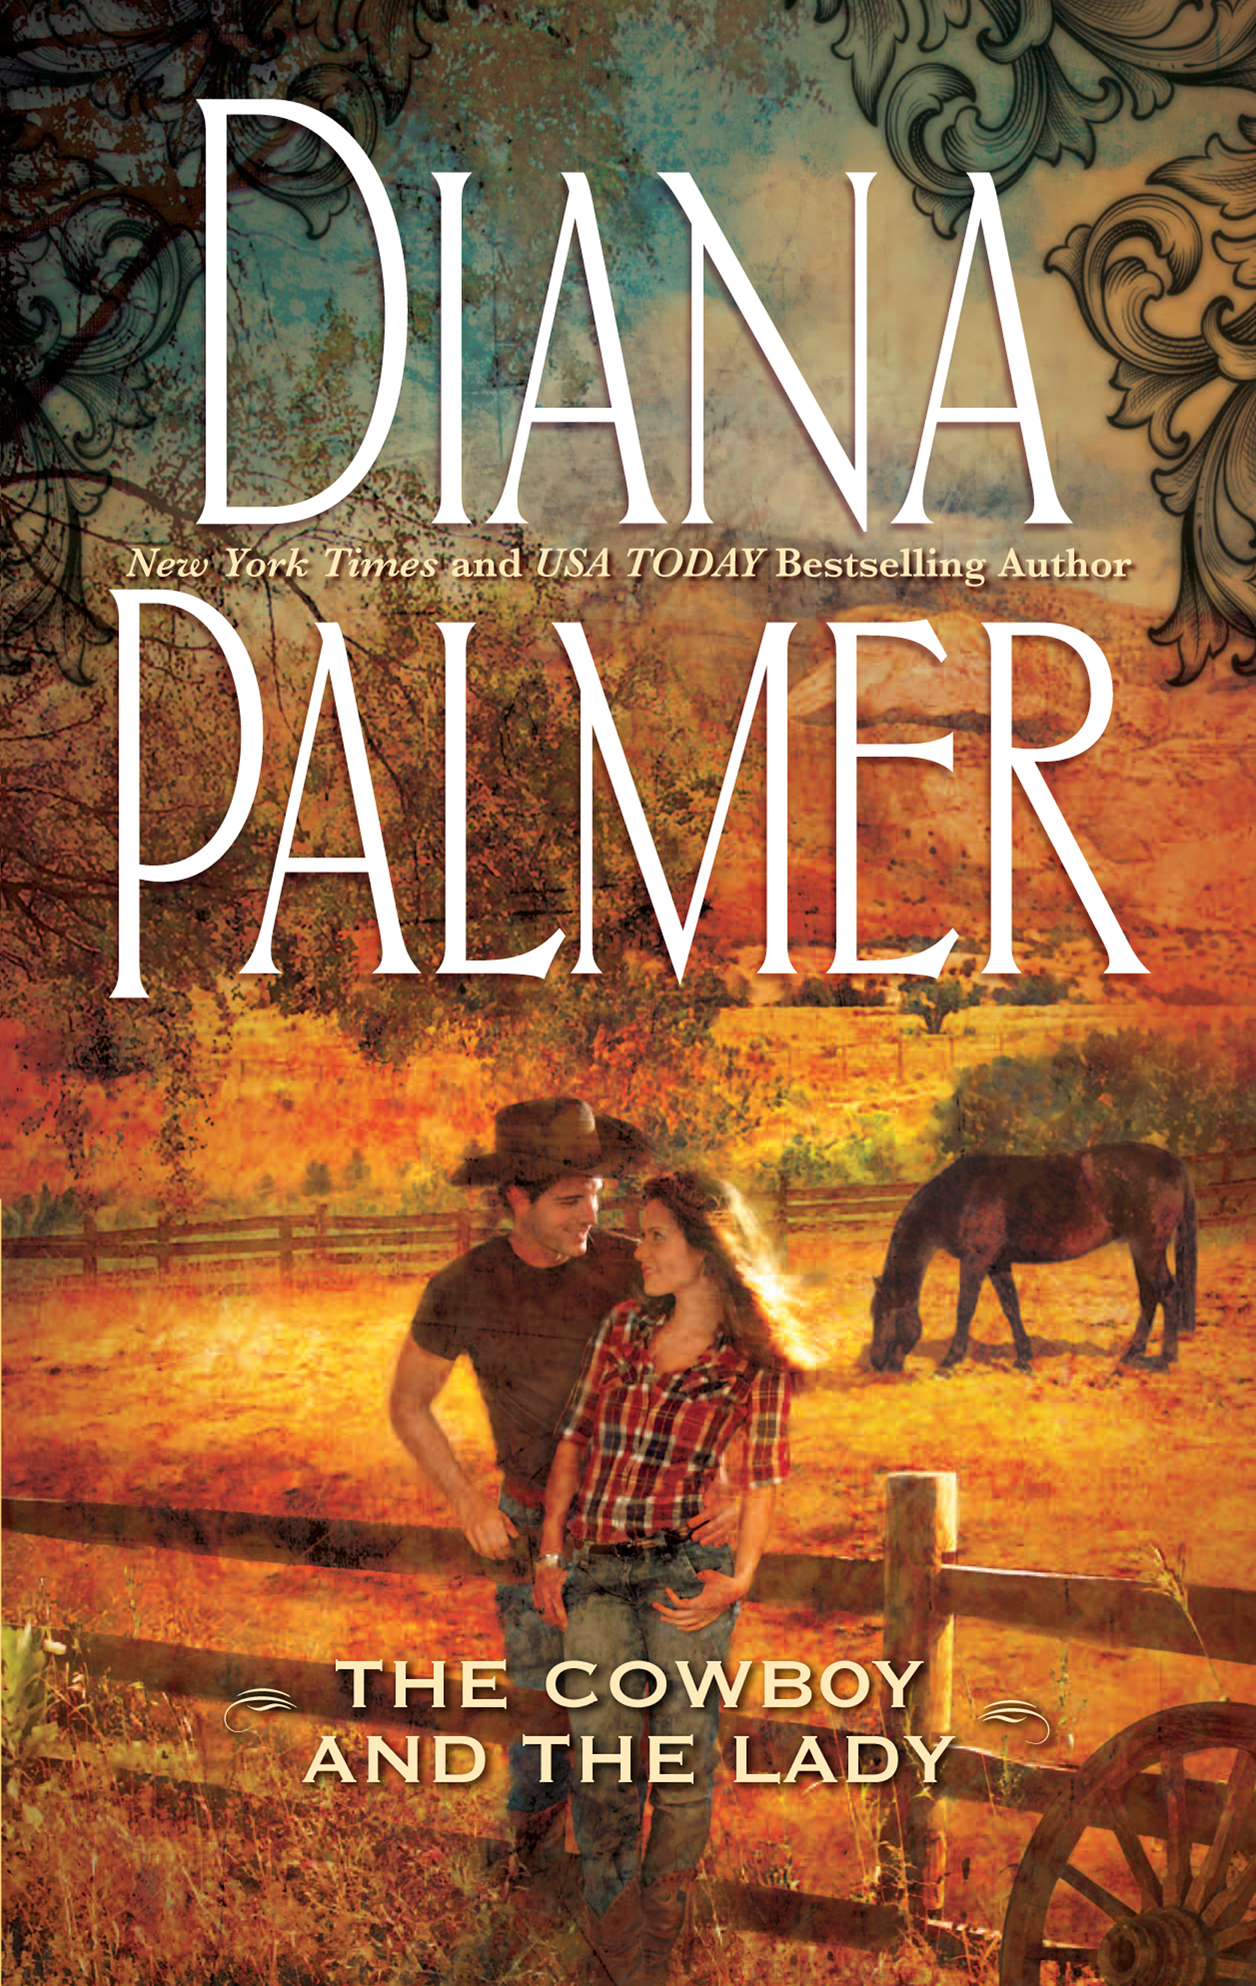 The Cowboy and the Lady (1982) by Diana Palmer